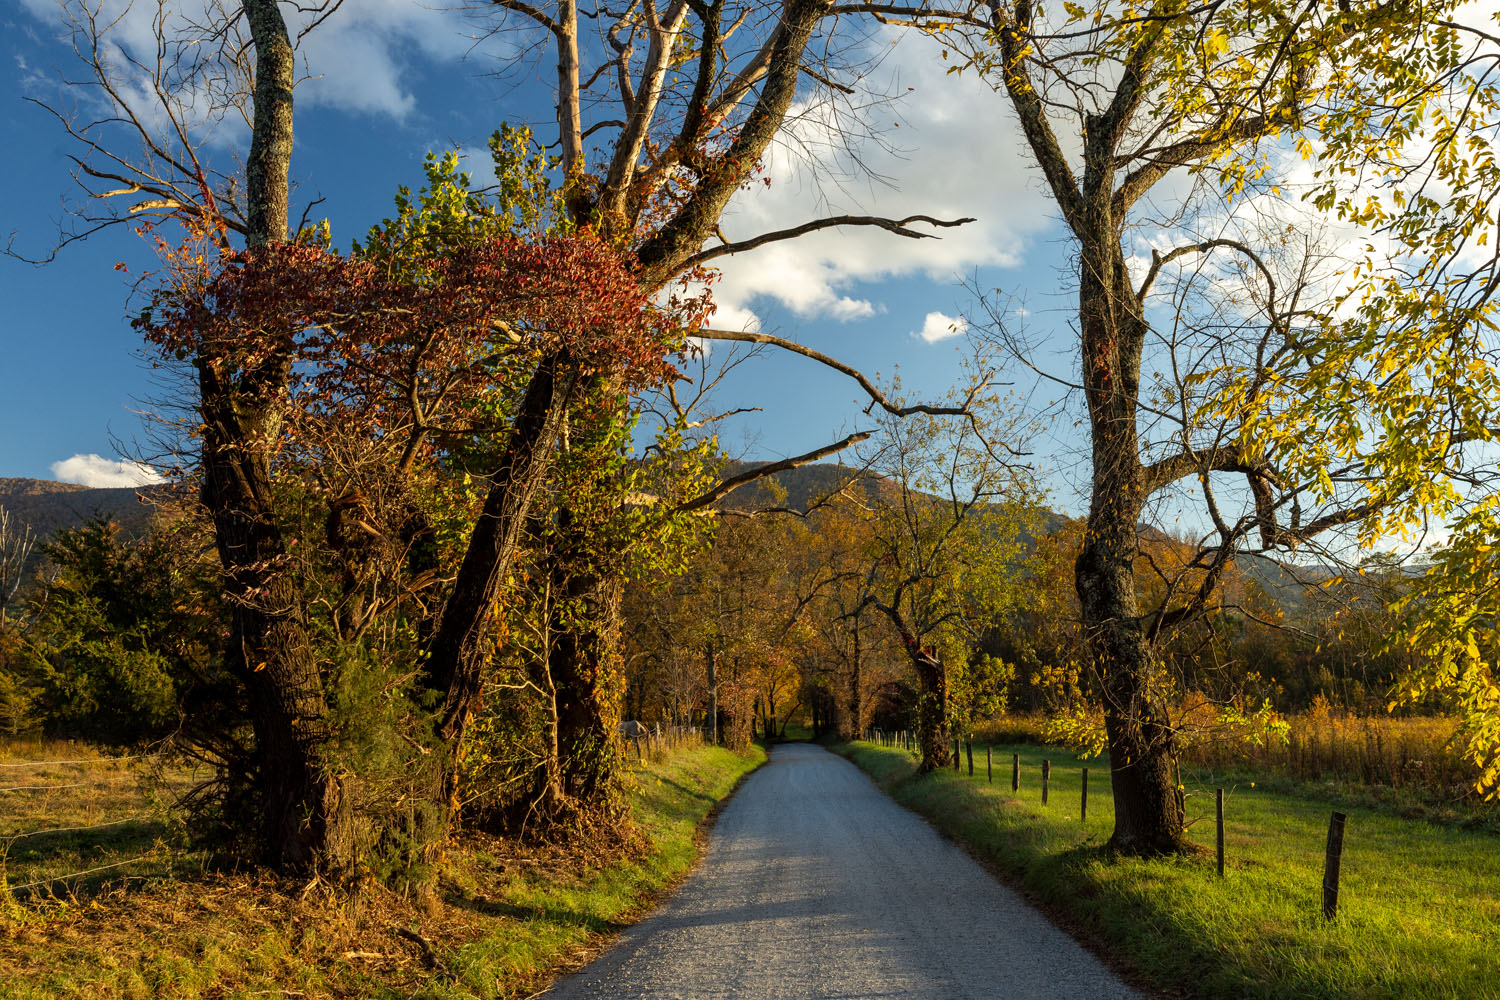 One of my favorite places to explore in Cades Cove, this quiet lane affords some great views, beautiful light, wildlife and even...